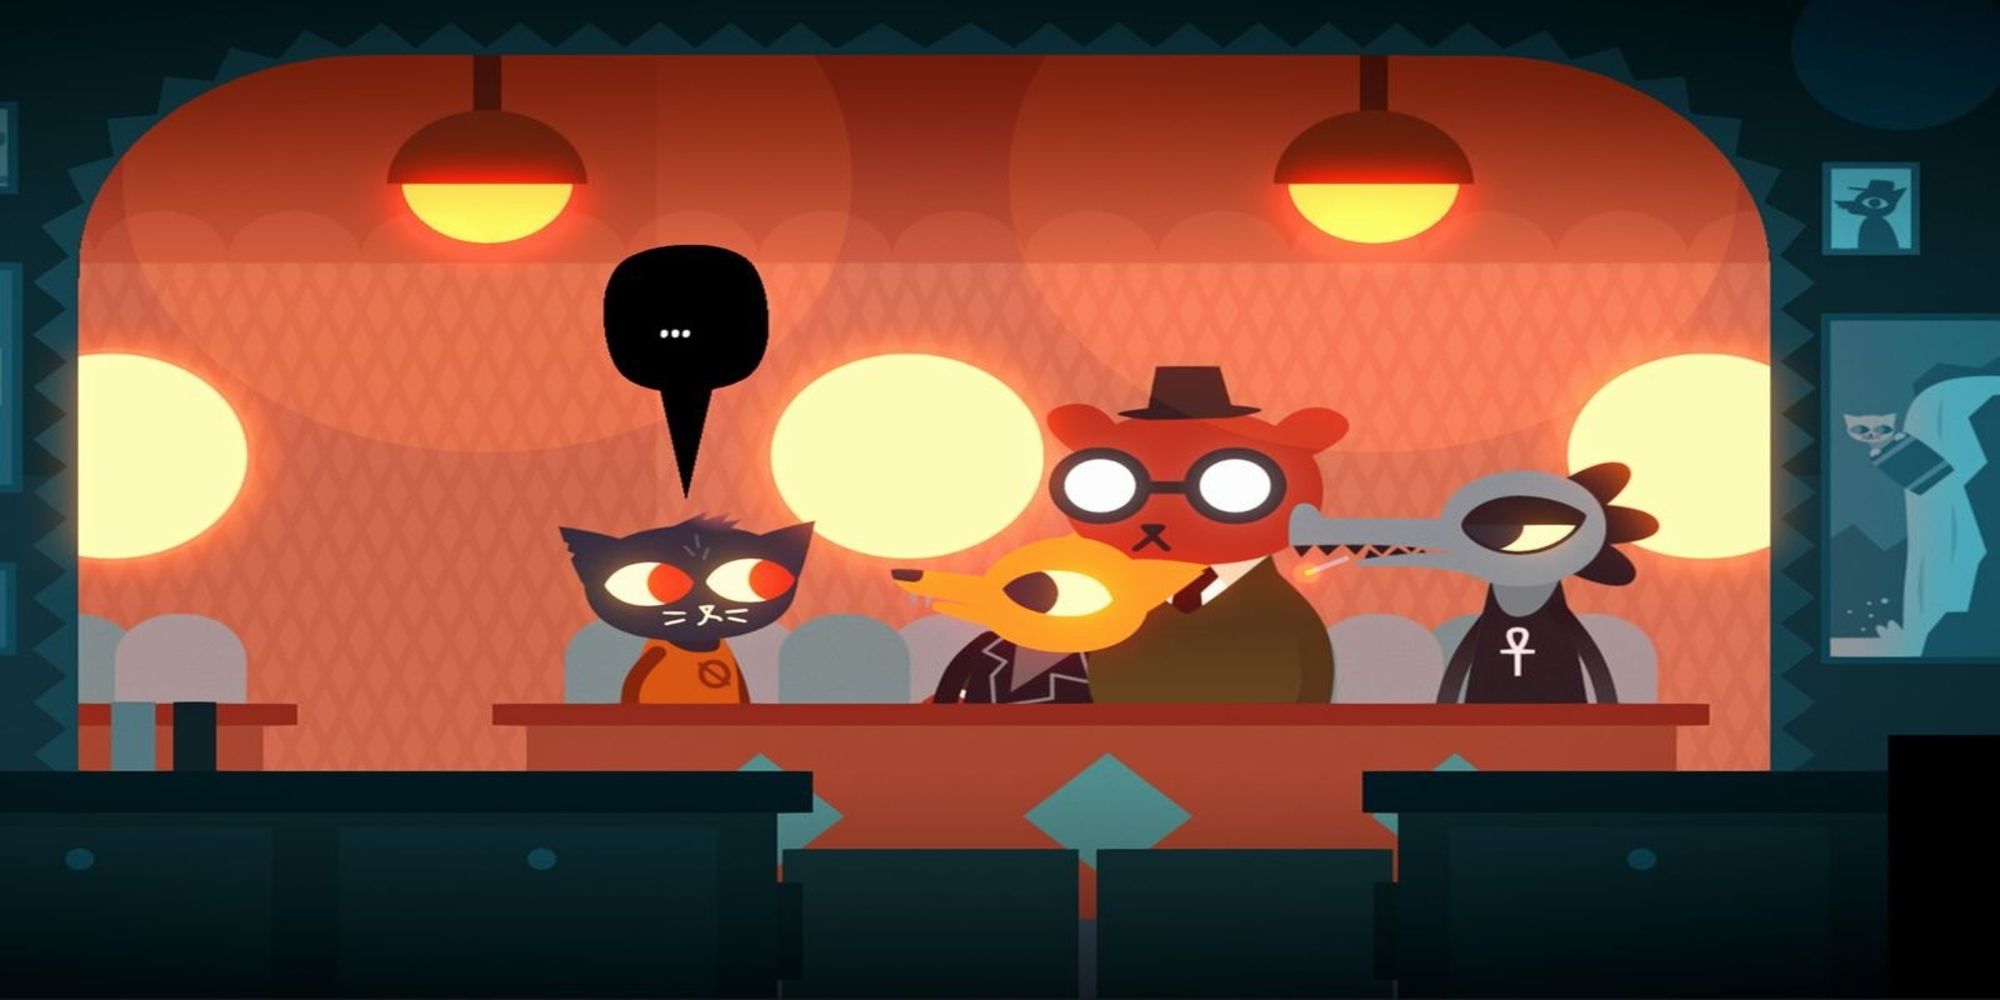 The protagonists of Night in the Woods have a conversation